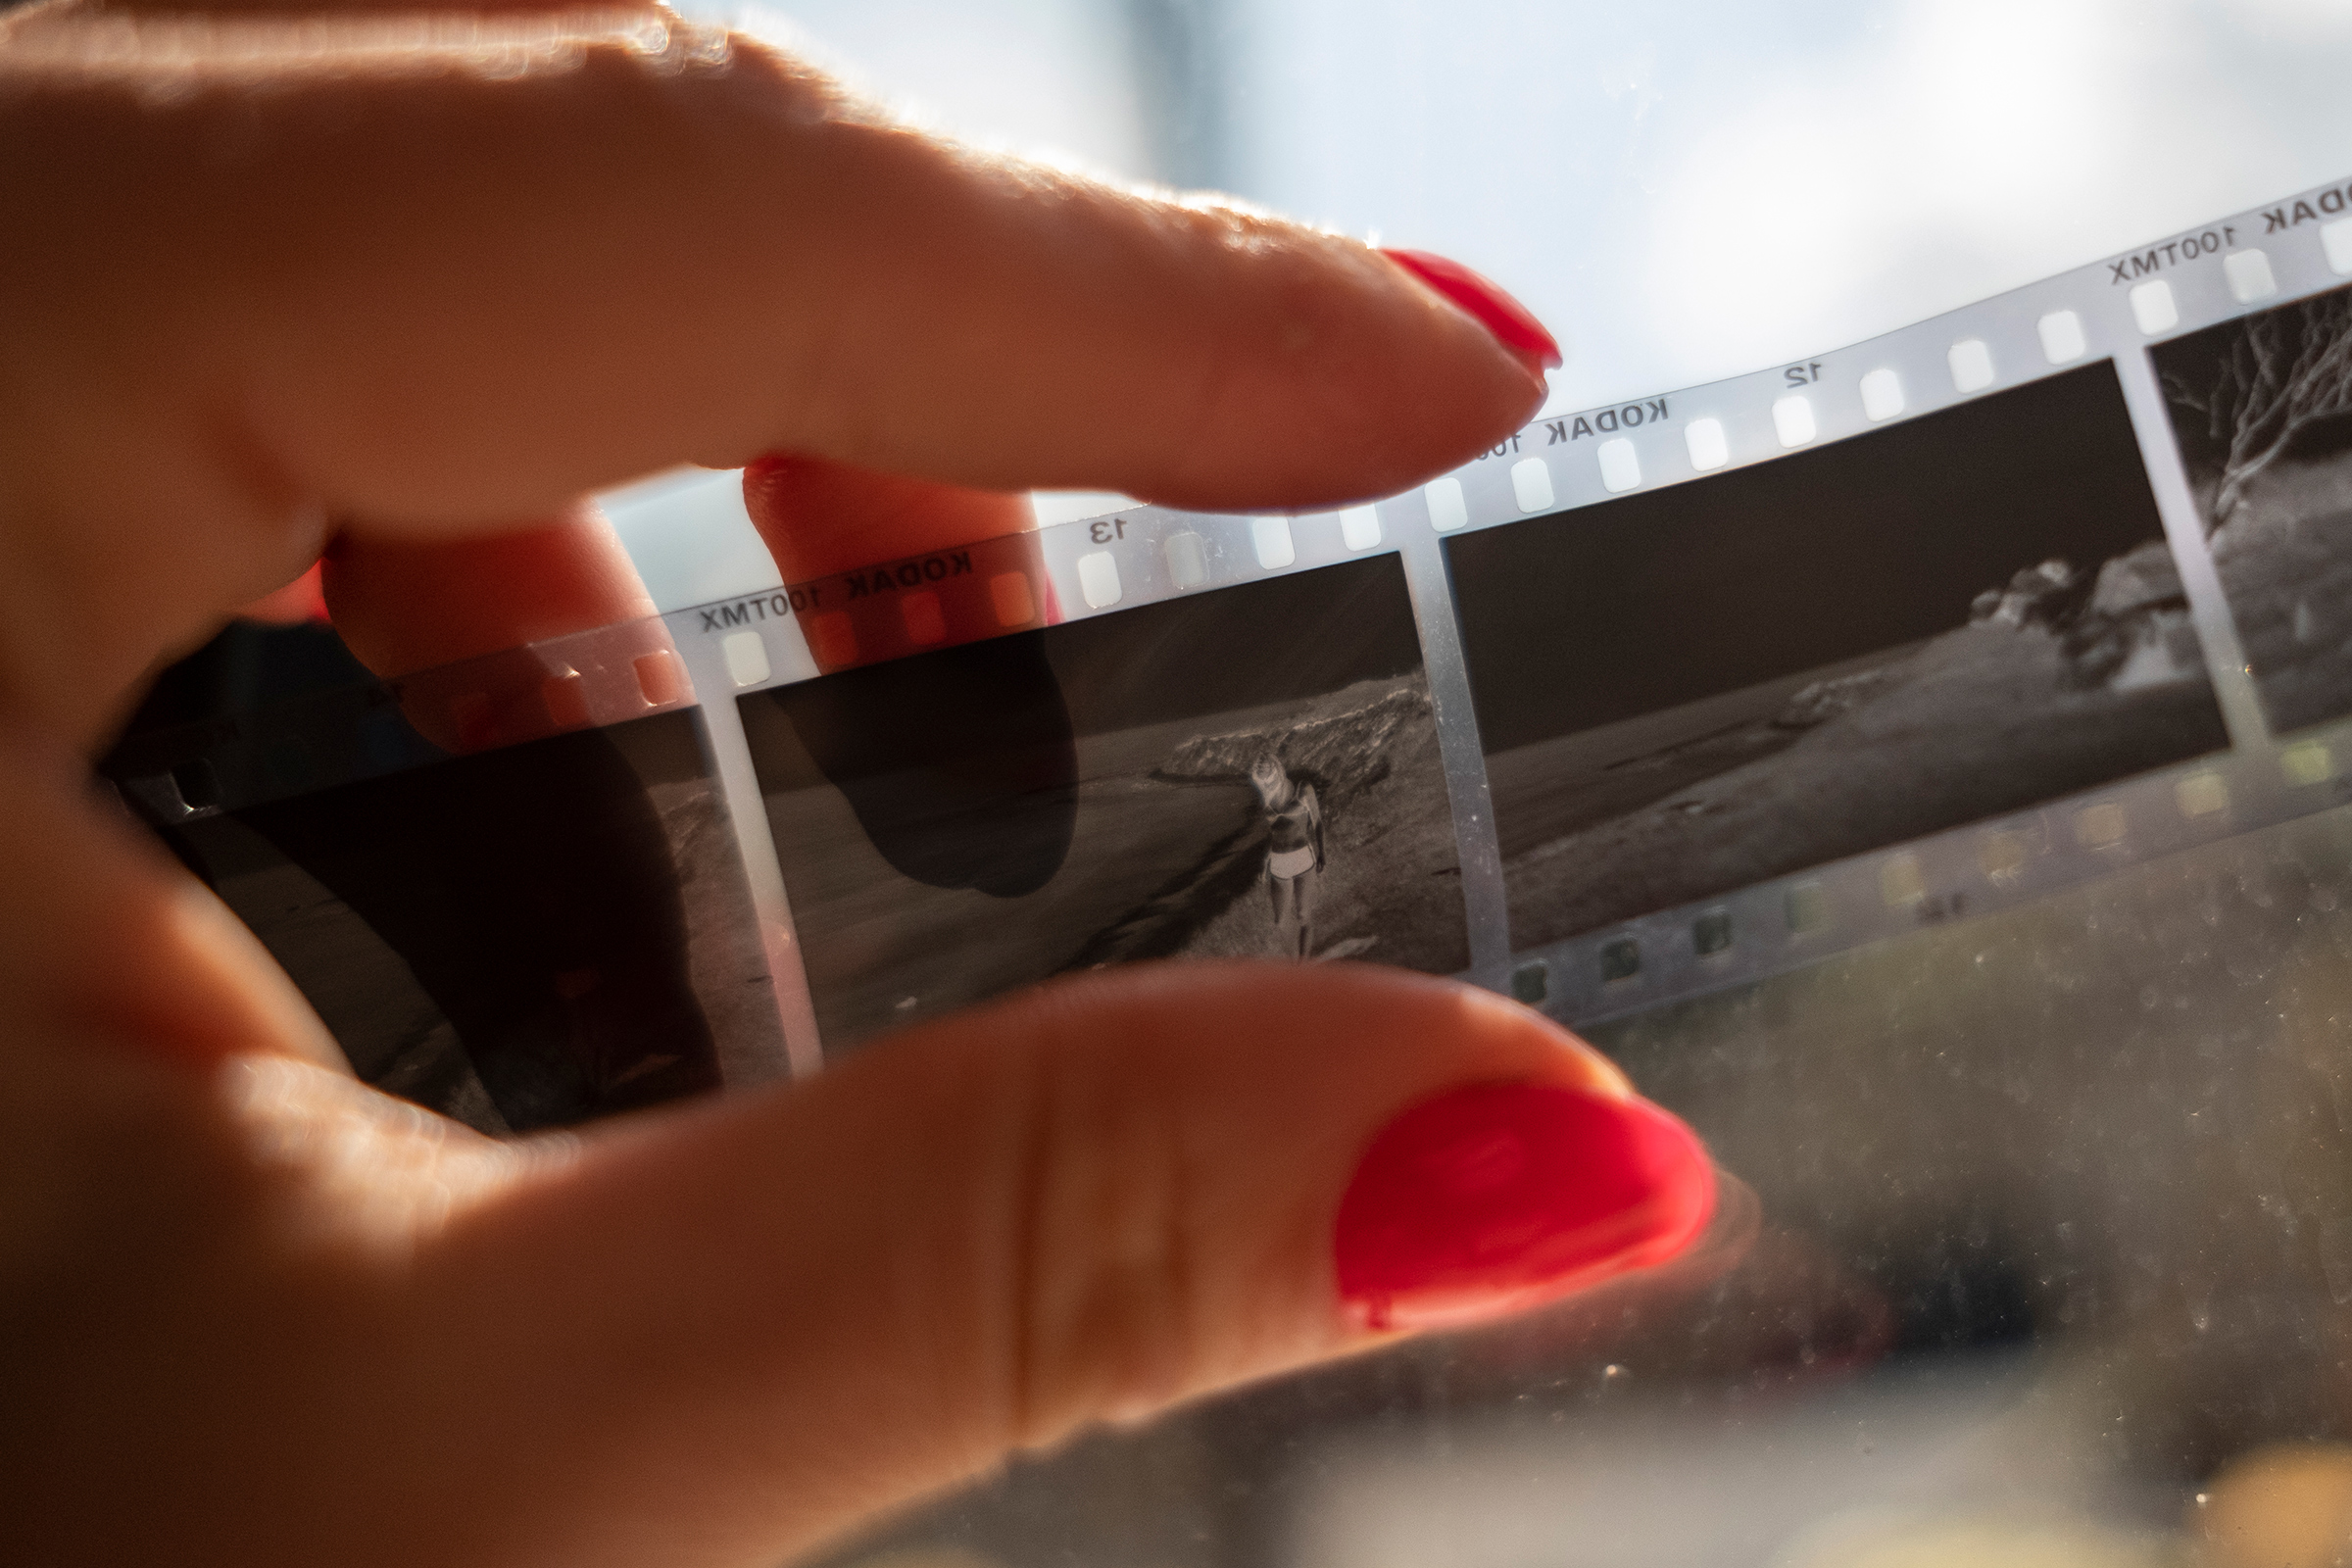 Fox Weber holds a 35mm negative film strip from a disposable camera she brought with her on a trip to Montauk with Peter Beard. (Gabriella Demczuk for TIME)